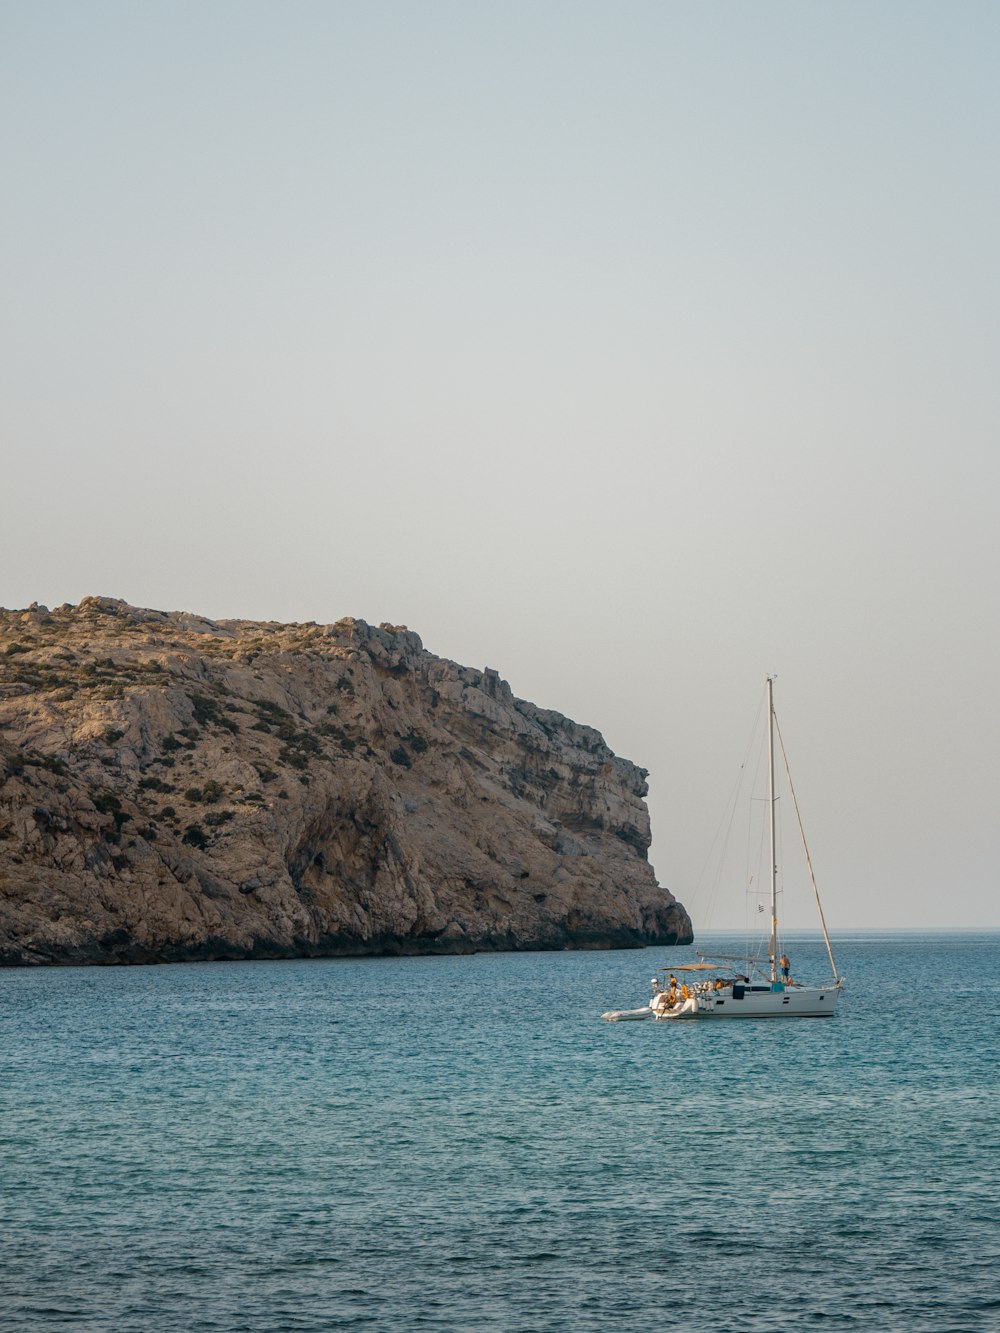 white boat on sea near brown rock formation during daytime